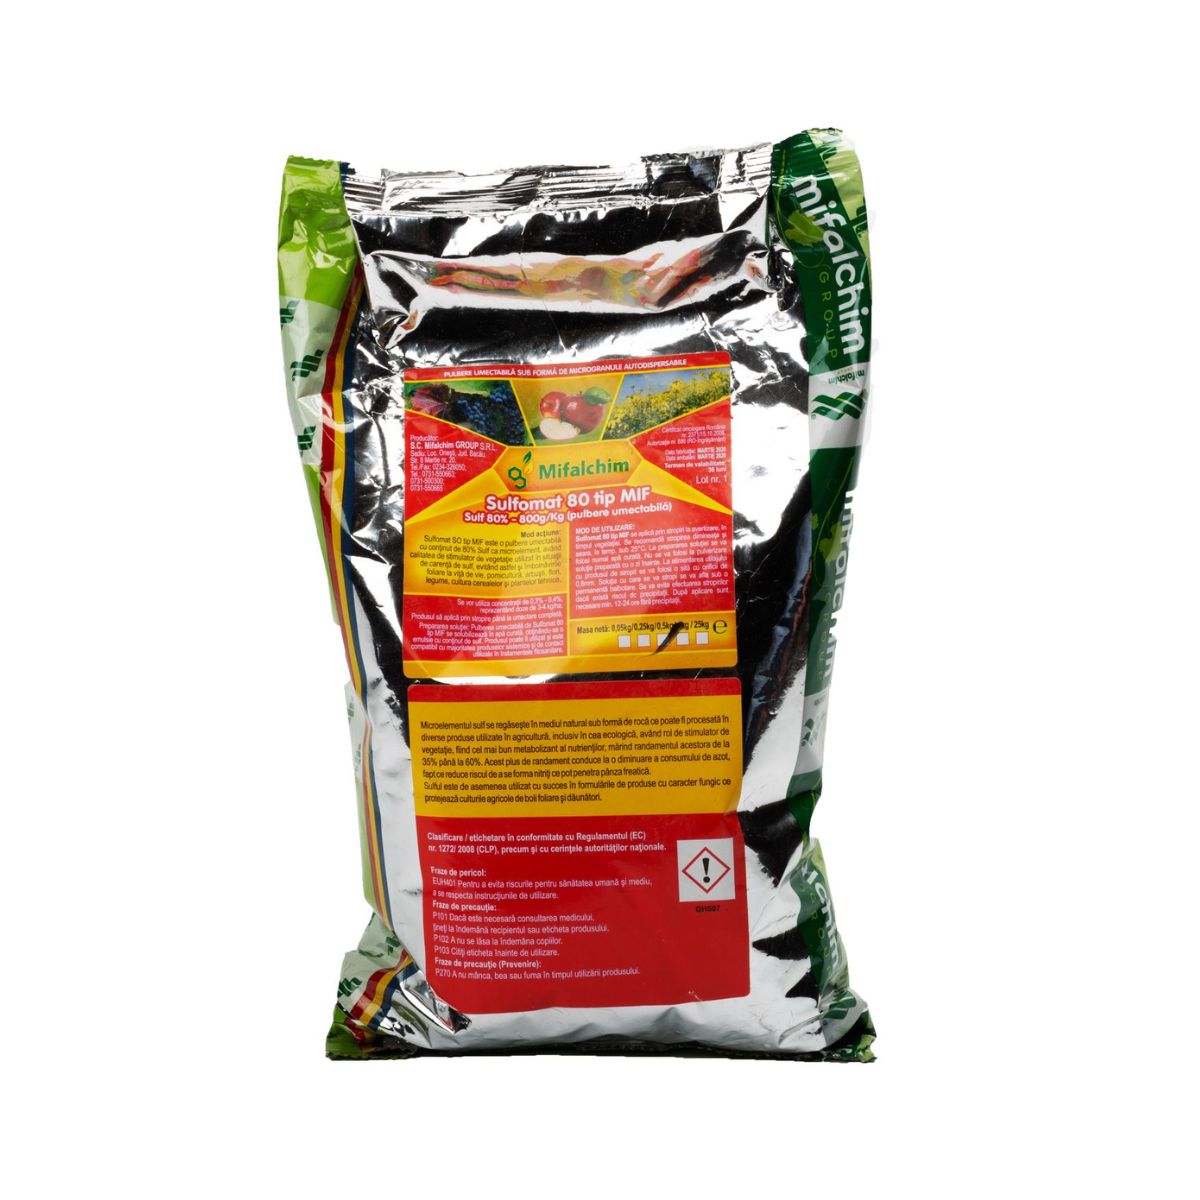 Fungicide - Fungicid Sulfomat 80 TIP MIF MIFALCHIM 500 g, hectarul.ro